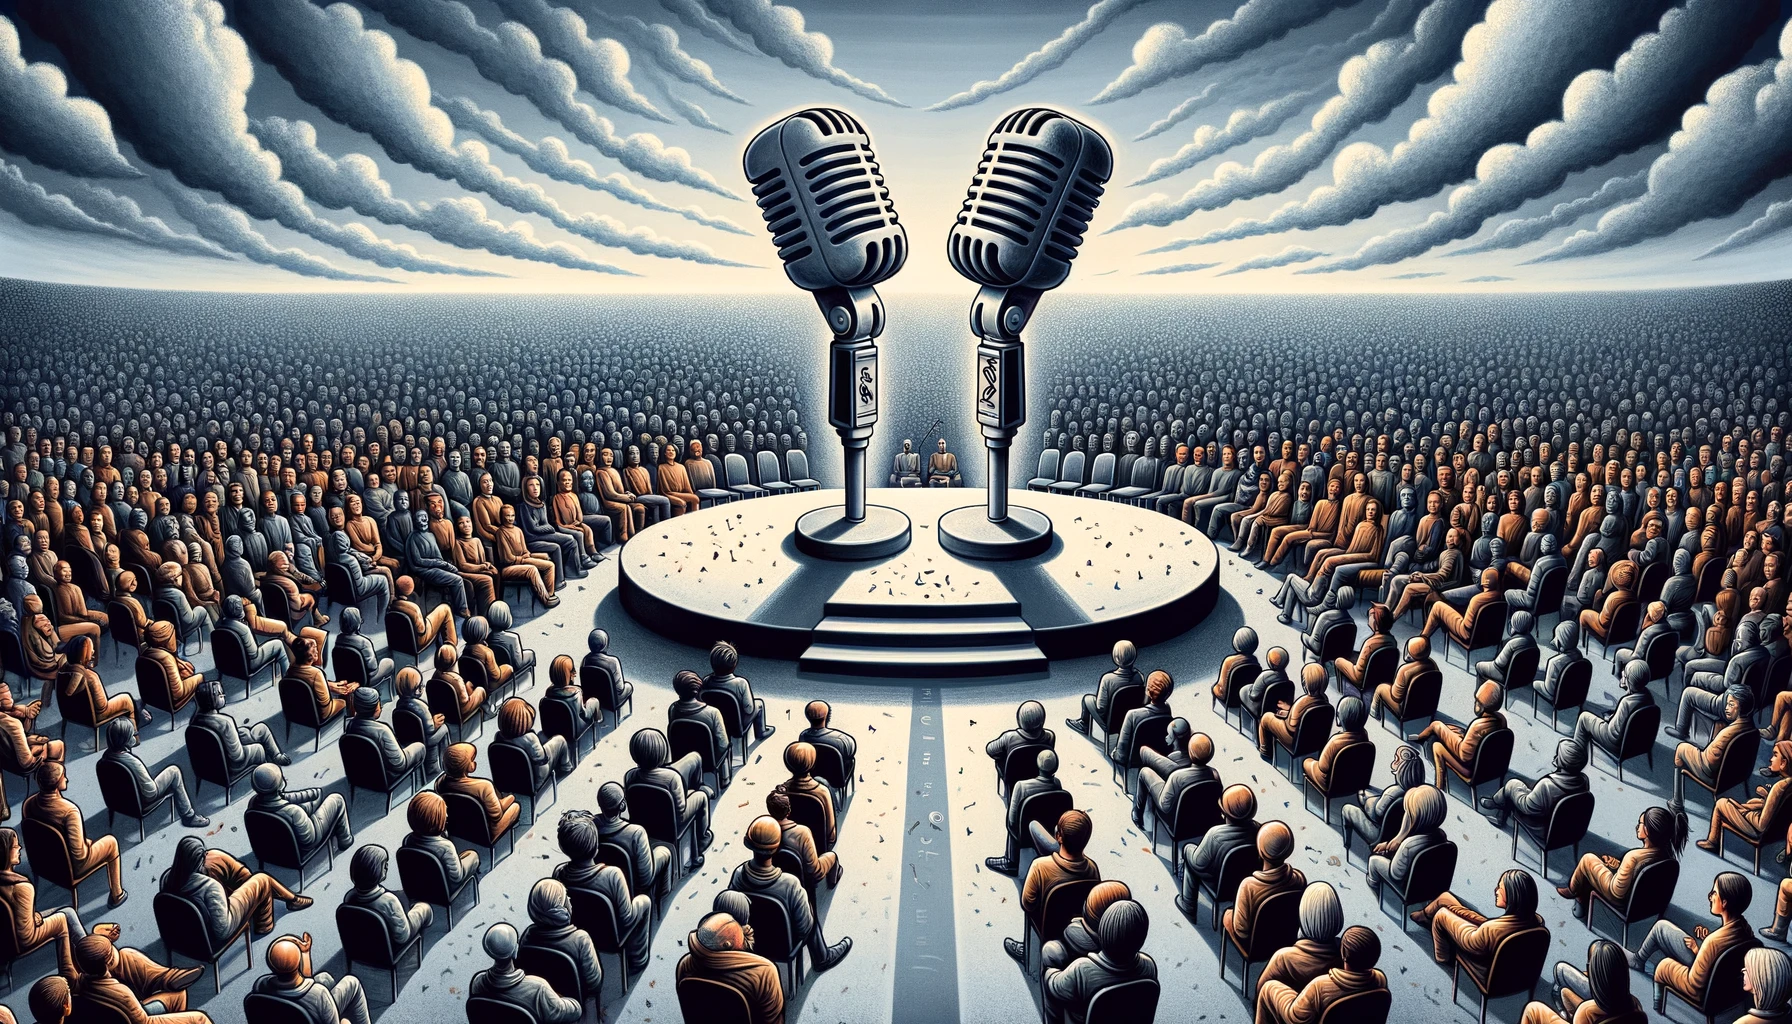 A conceptual debate stage with two symbolic microphones representing opposing views, set against an audience of varied opinions, highlighting the ongoing struggle between controlling misinformation and preserving the freedom of speech.